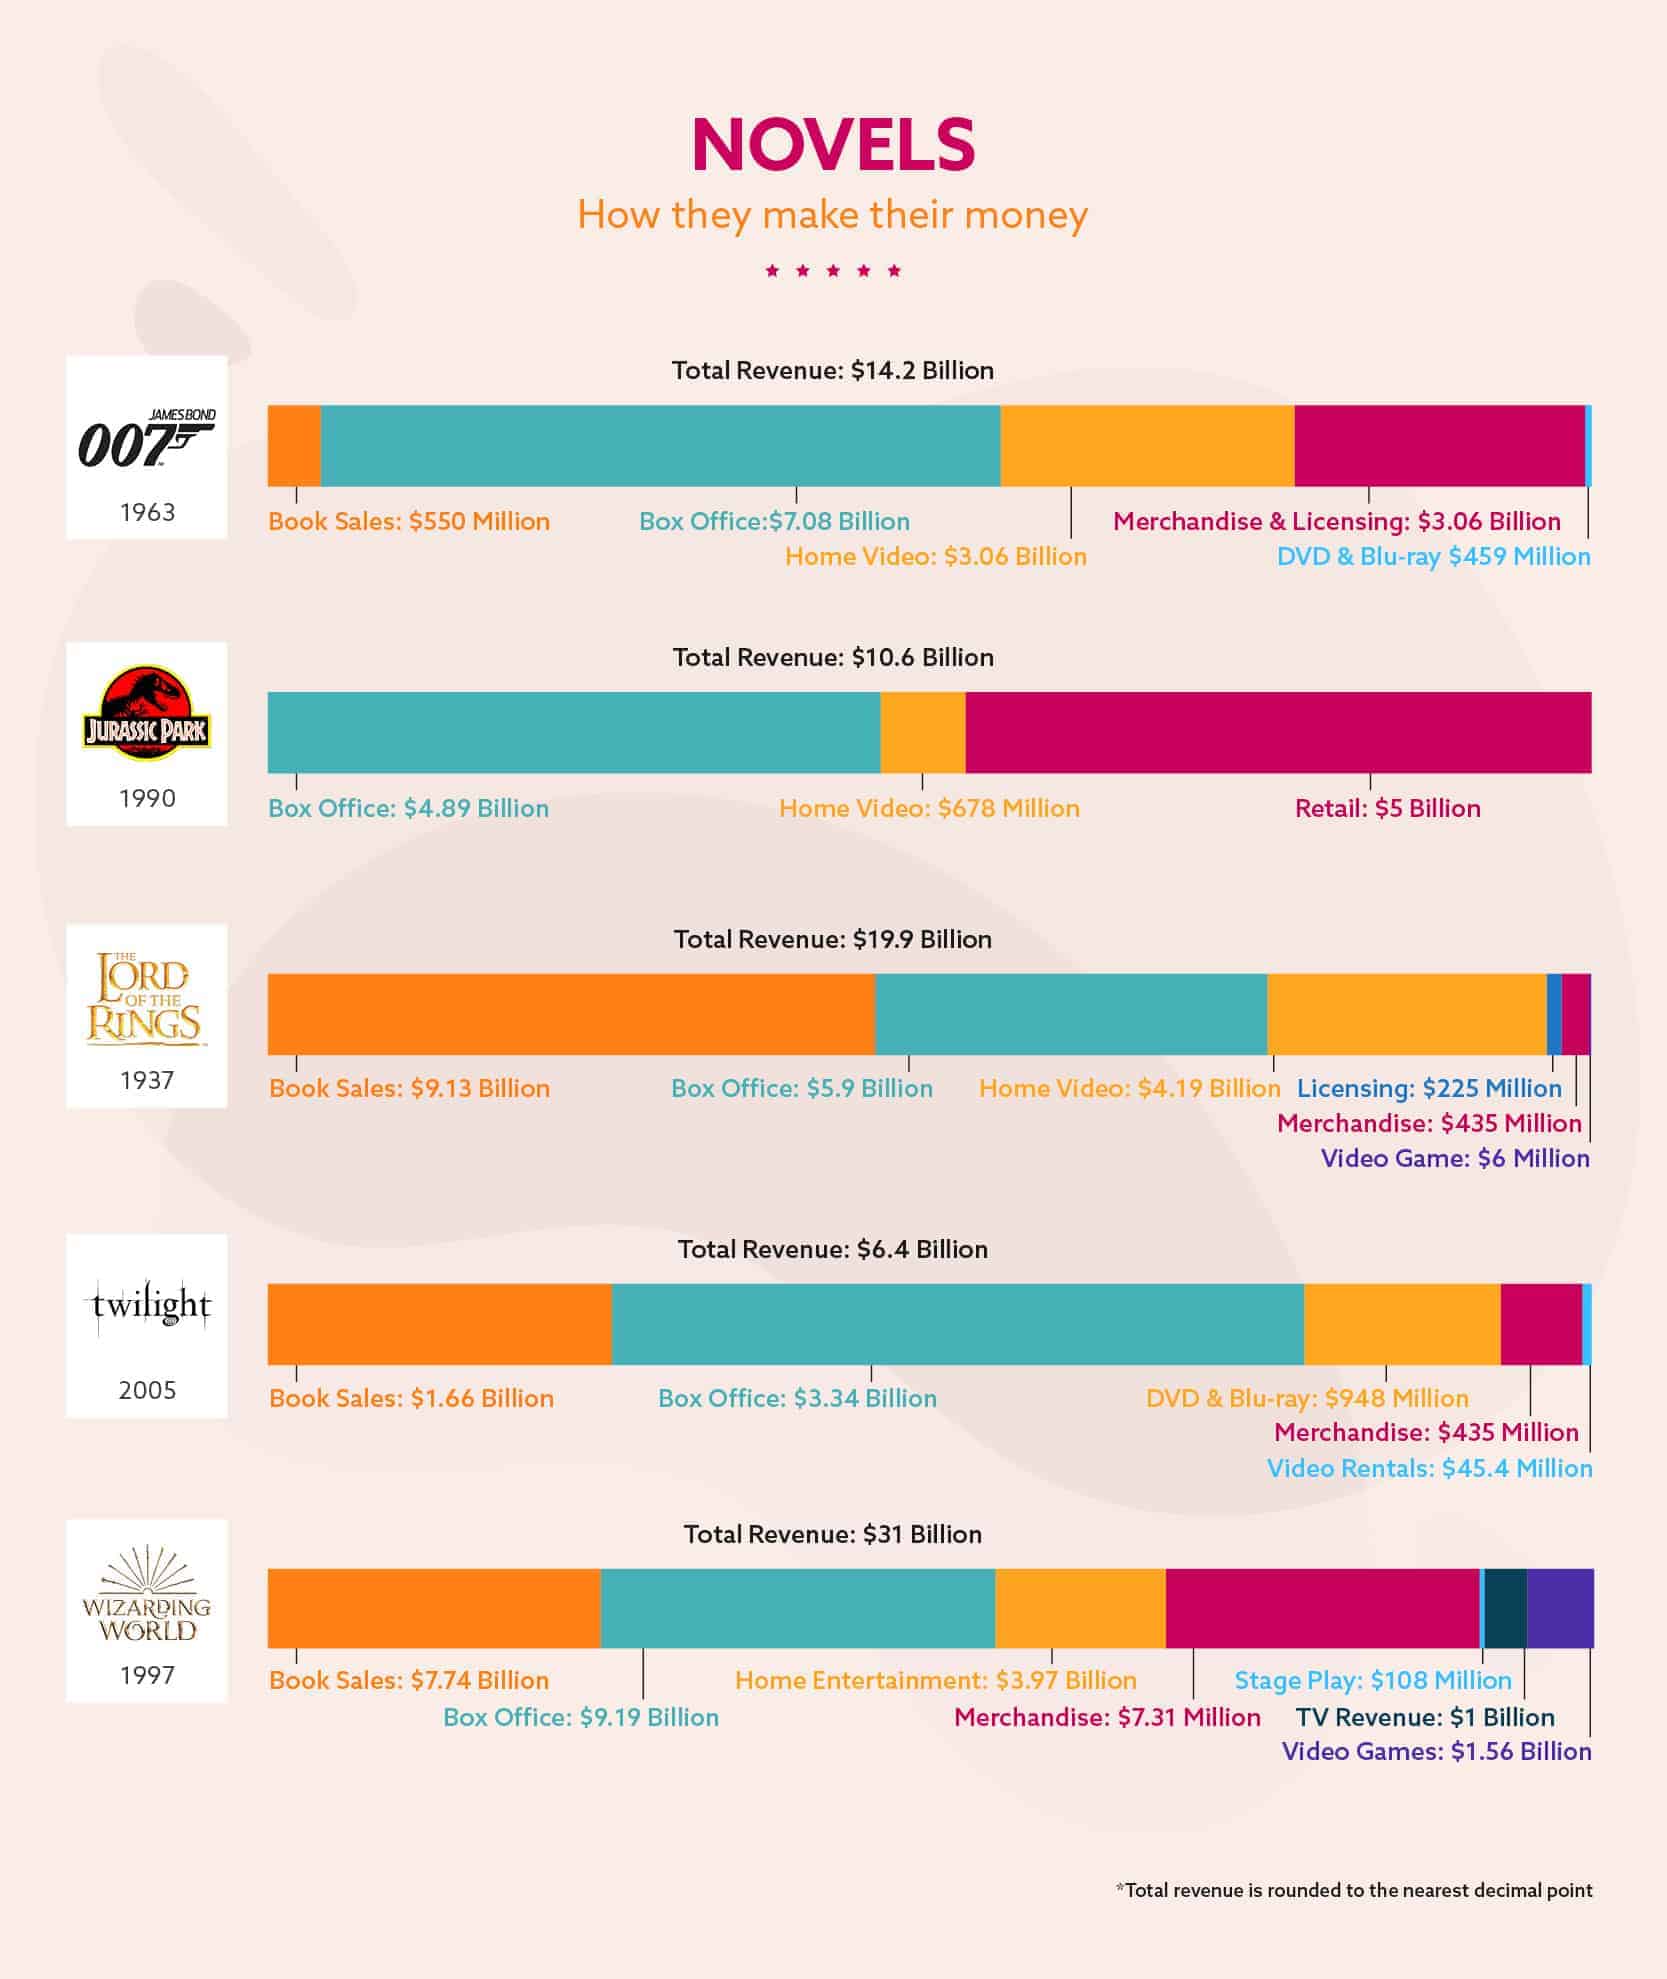 Novels – How They Make Their Money